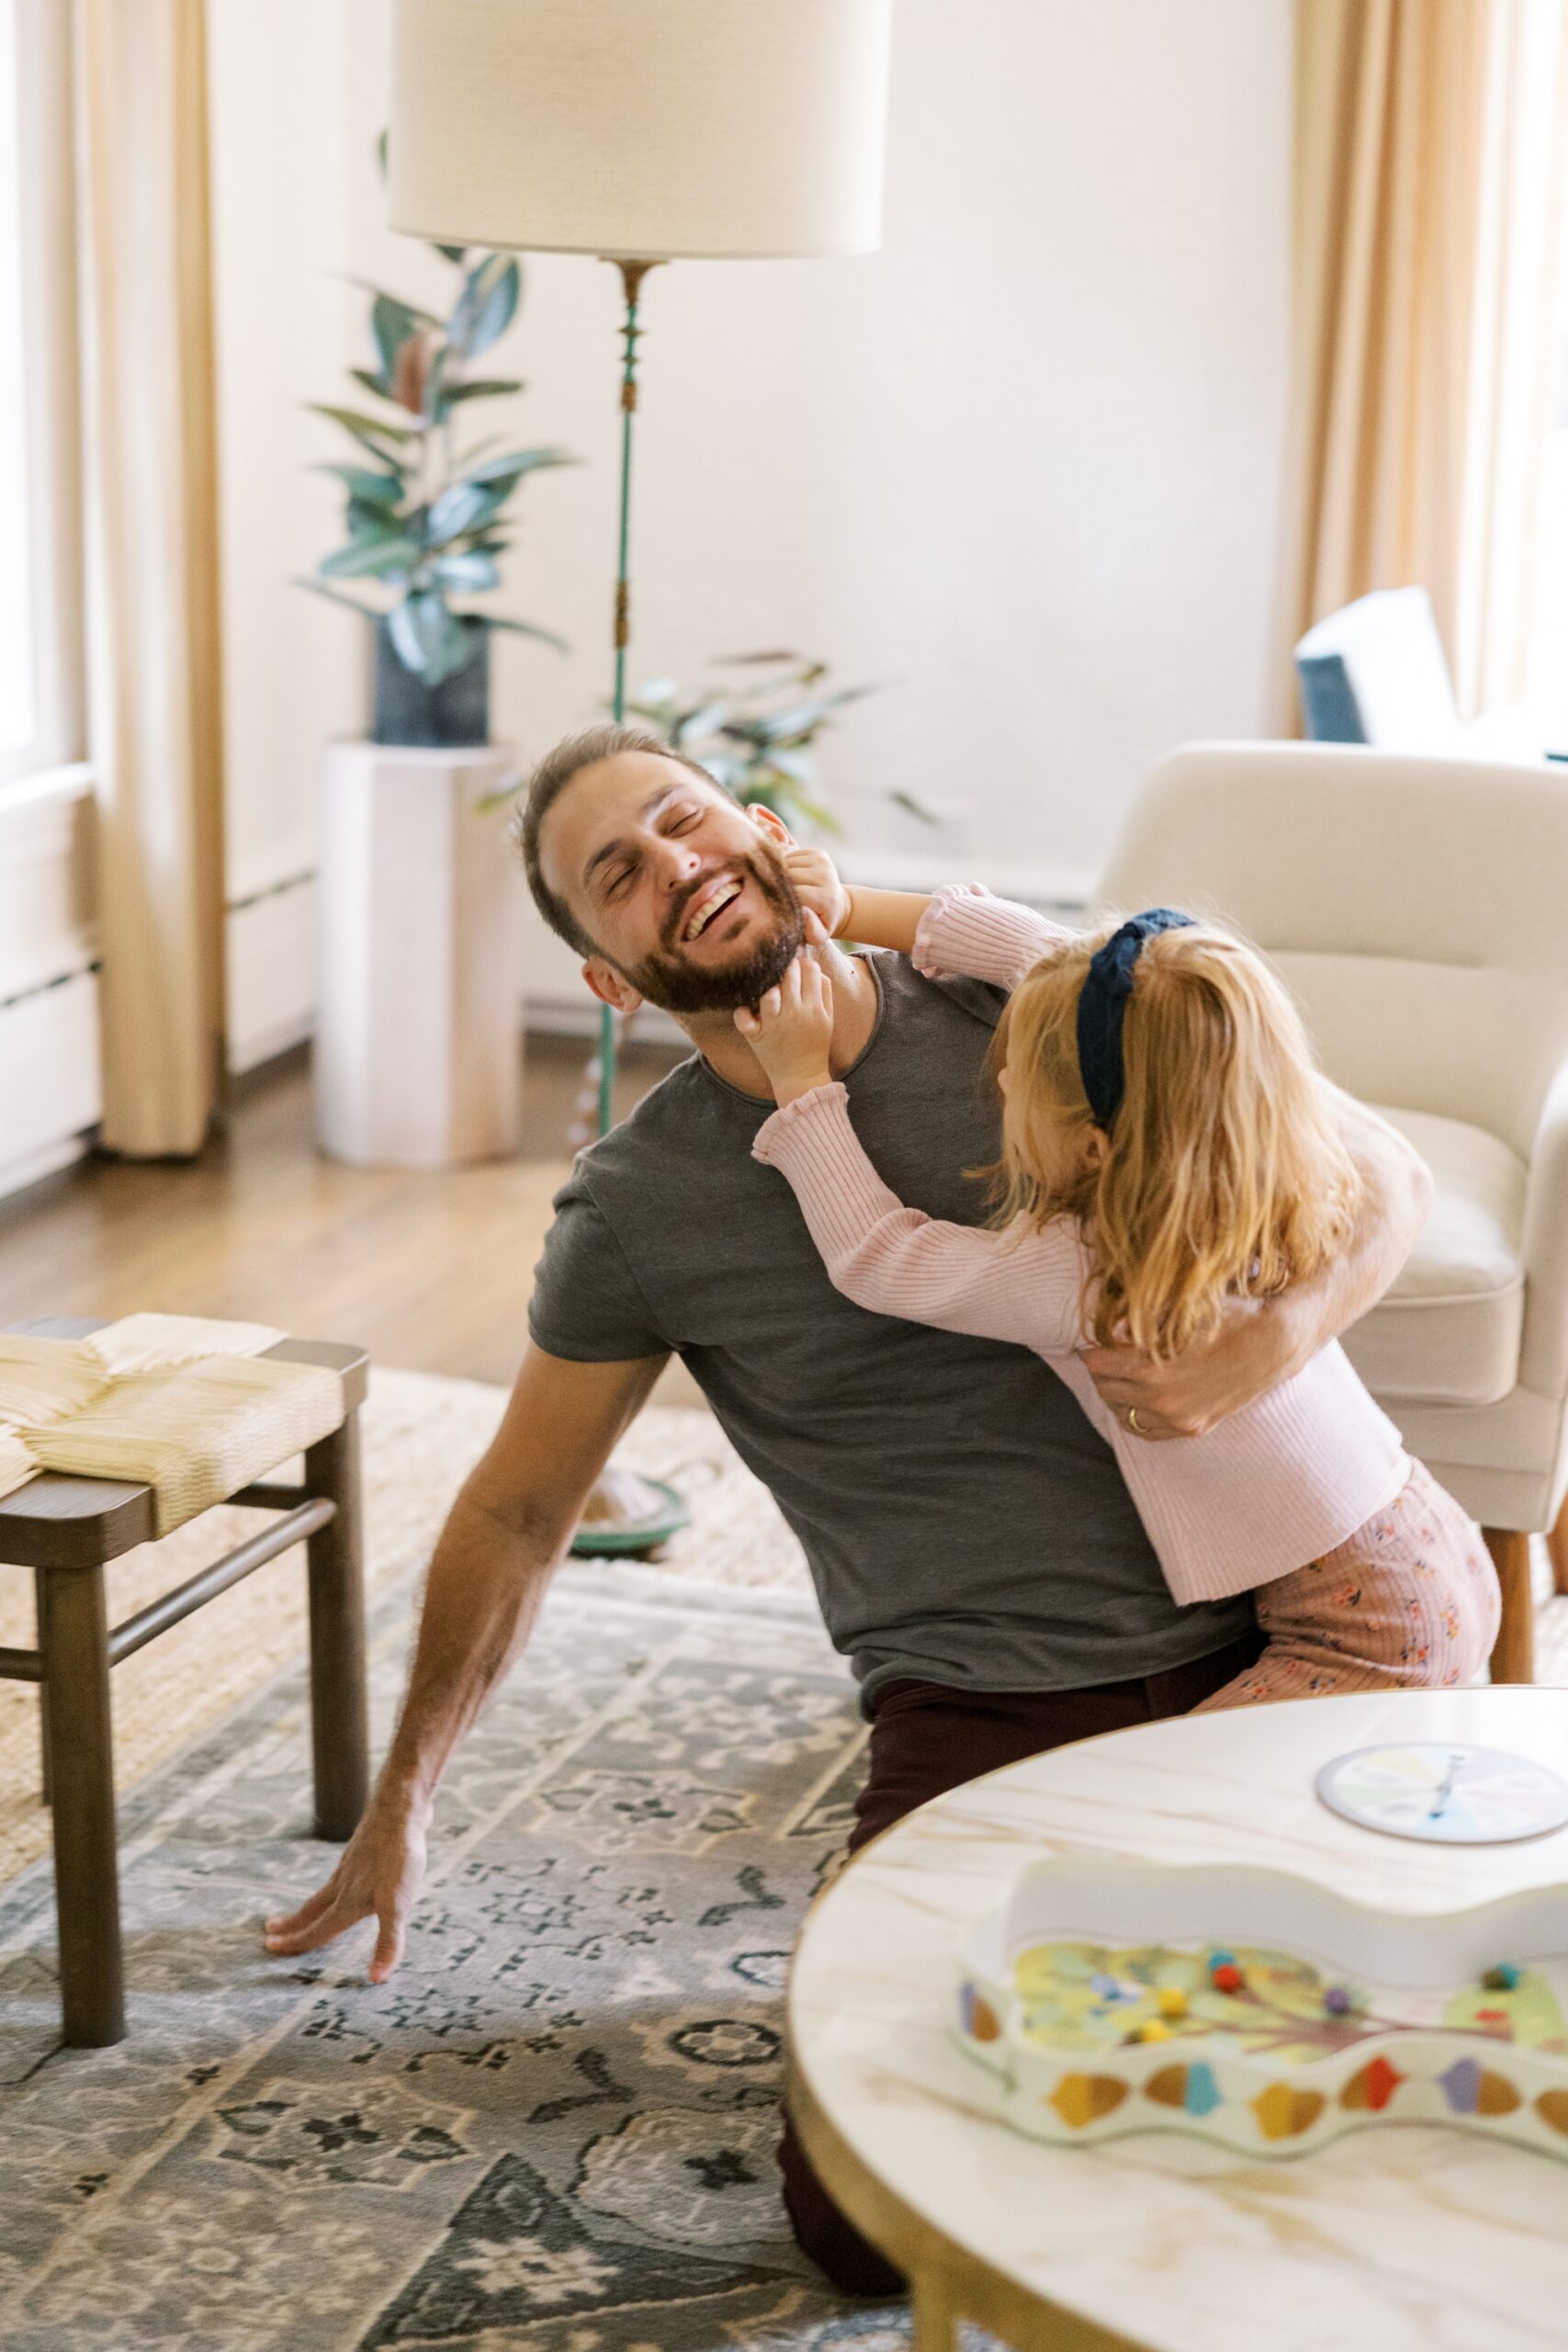 The dad and daughter laughed and played during the Chicago home lifestyle photo session